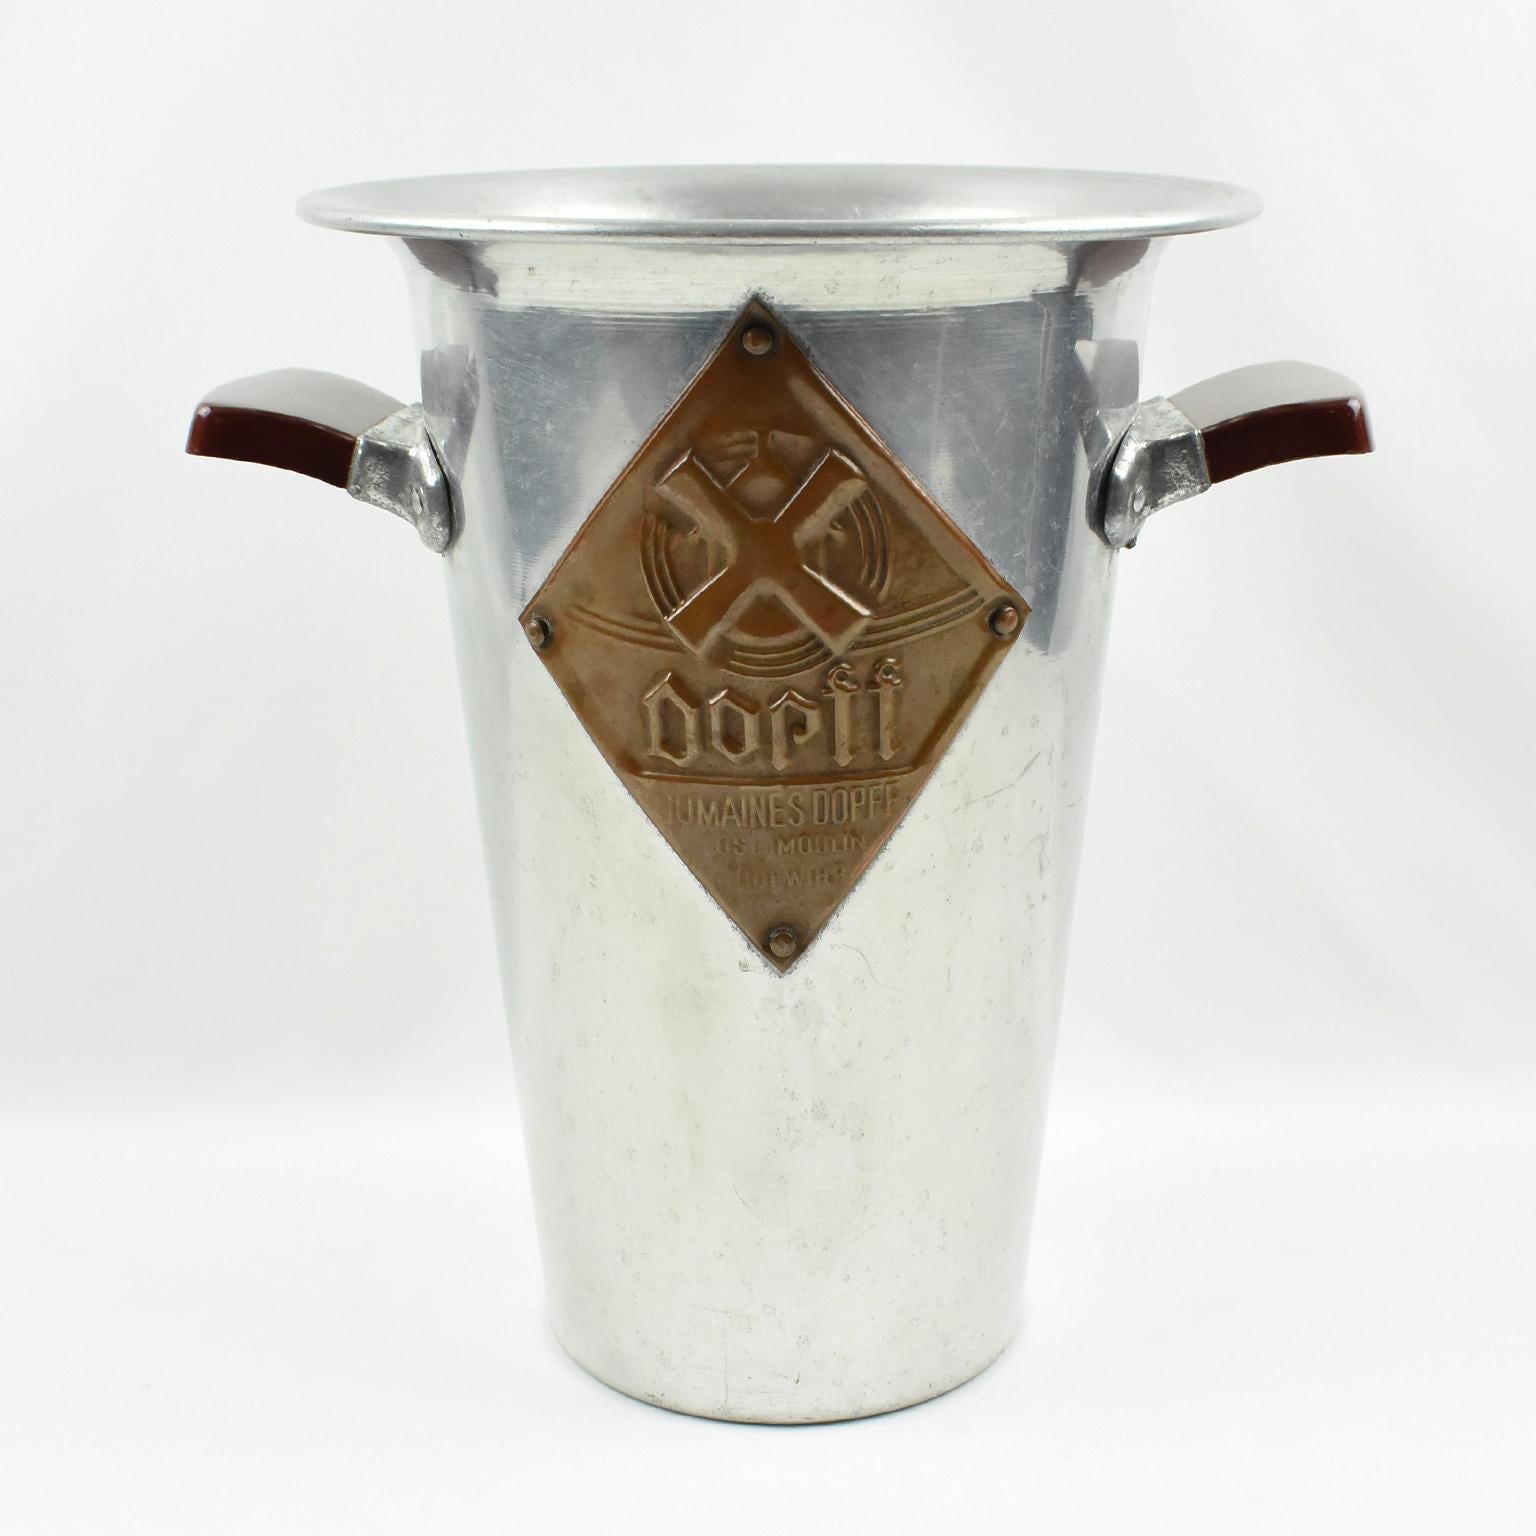 This is a stunning French modernist aluminum ice bucket or wine cooler crafted in the 1950s. Specially designed for tall Alsace white wine bottles, this bottle chiller will work with any other wine bottle. It was in use in restaurants in France in